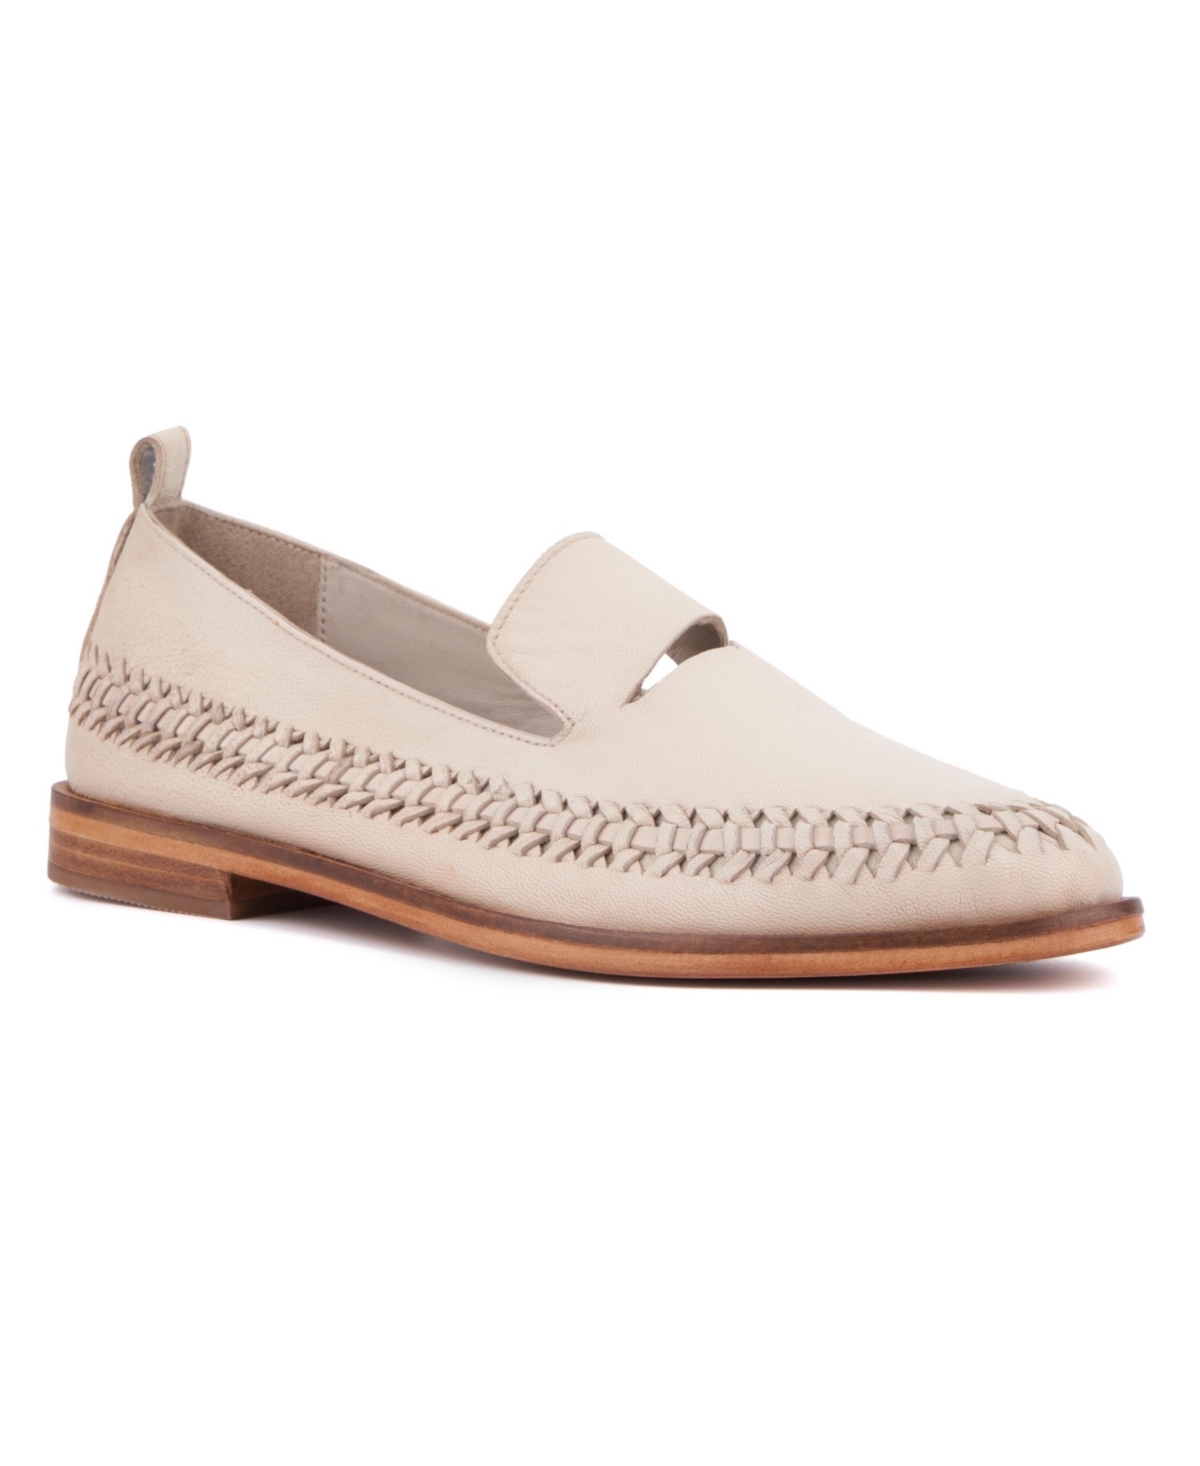 Vintage Foundry Co Vintage Foundry Co. Women's Haiden Loafer - Tan